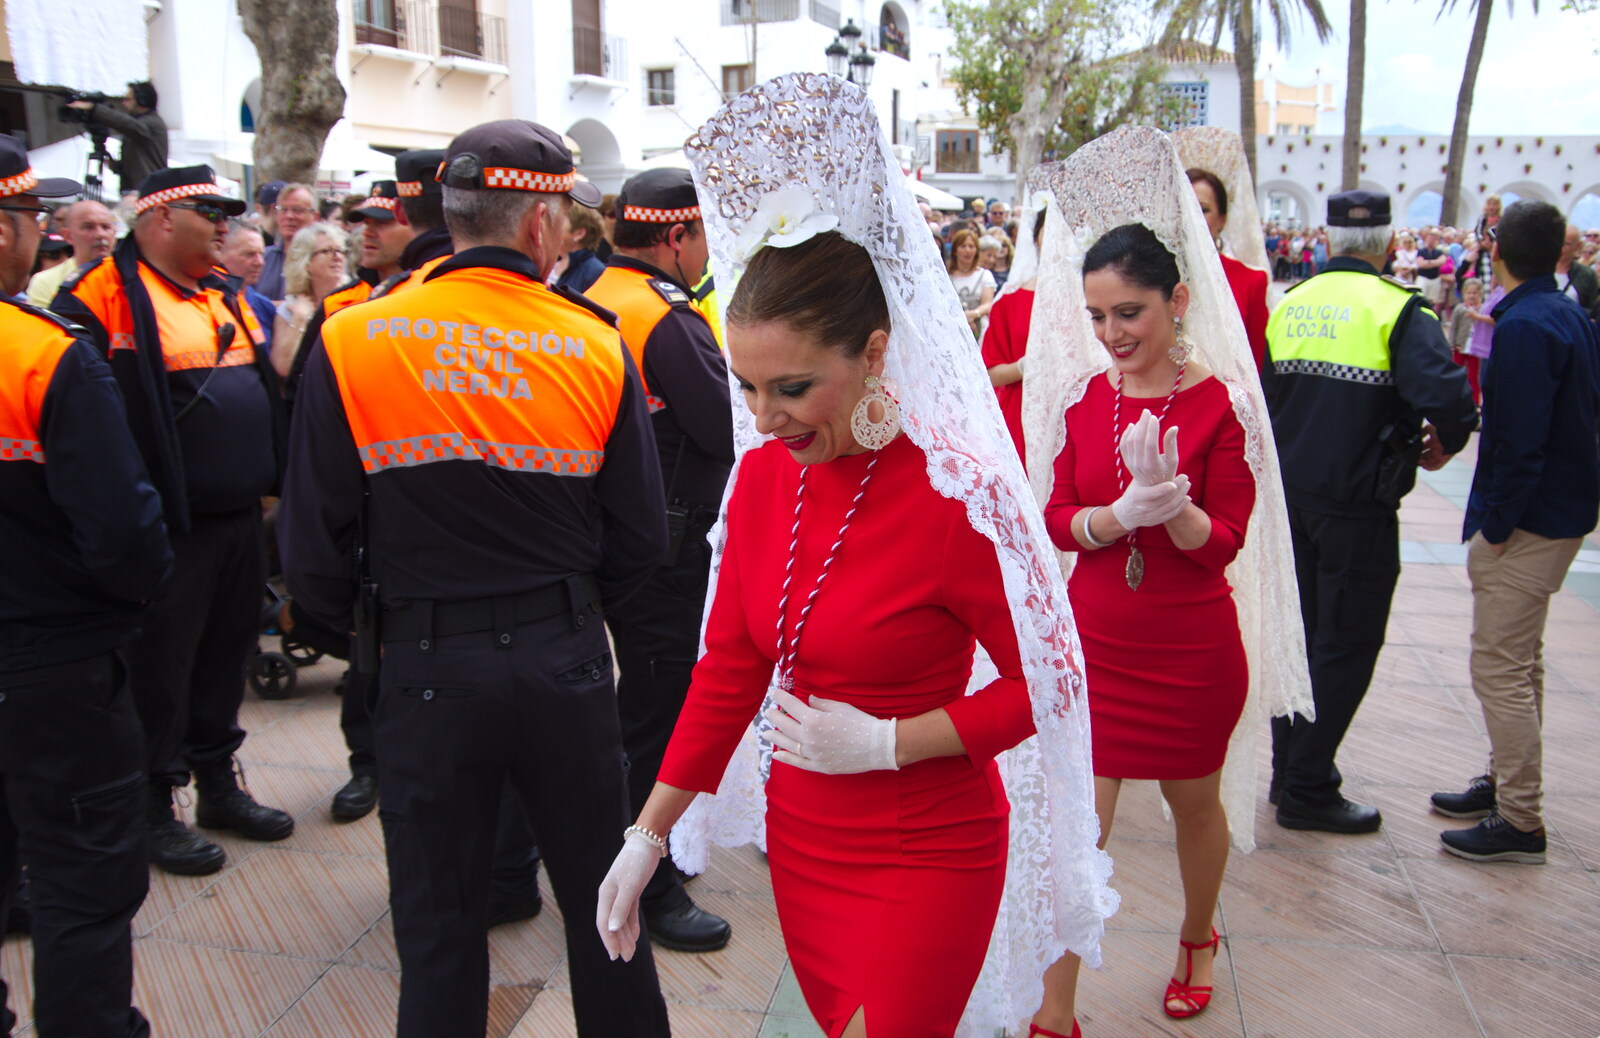 A couple of women in nets from An Easter Parade, Nerja, Andalusia, Spain - 21st April 2019